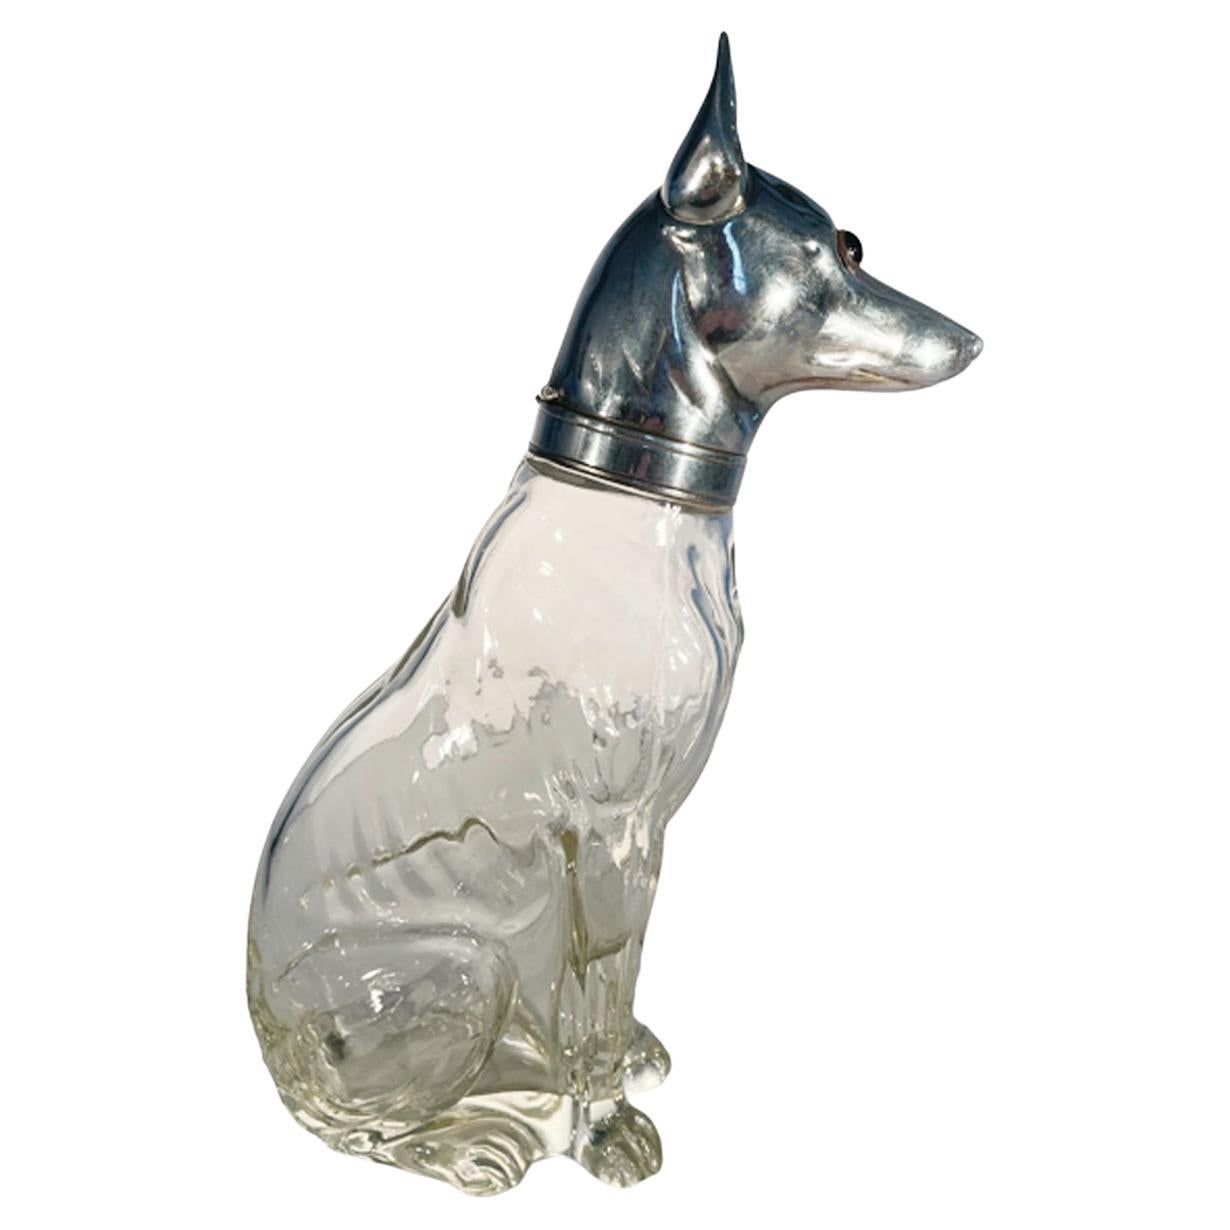 Art Deco decanter in the form of a Greyhound or Whippet. The dogs well defined clear glass body in a seated position is topped with a hinged silver plate head looking forward with glass eyes, the collared neck opens to reveal an inner glass stopper.